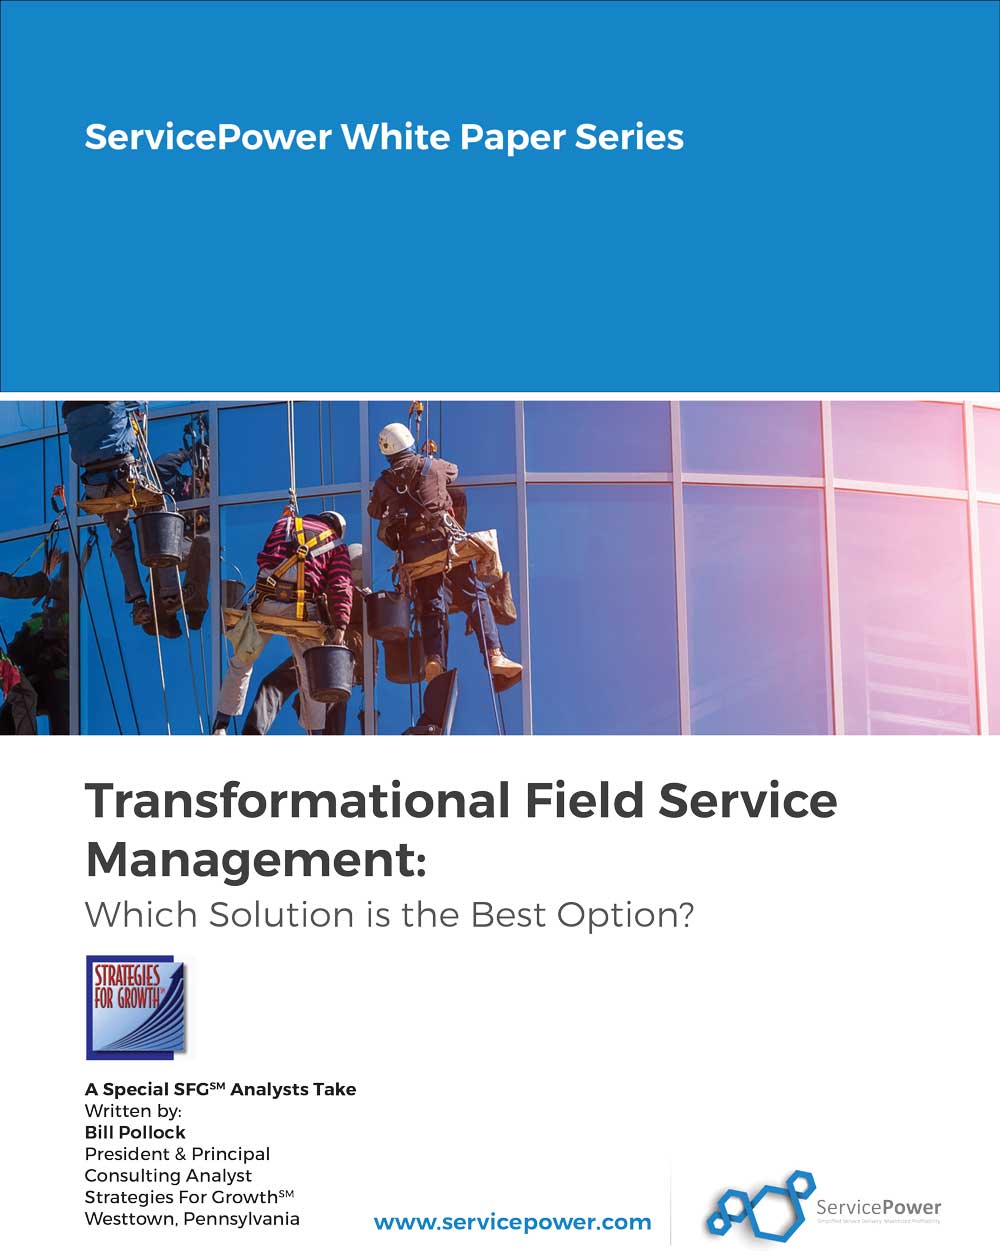 Download: Transformational Field Service Management: Which Solution is the Best Option?